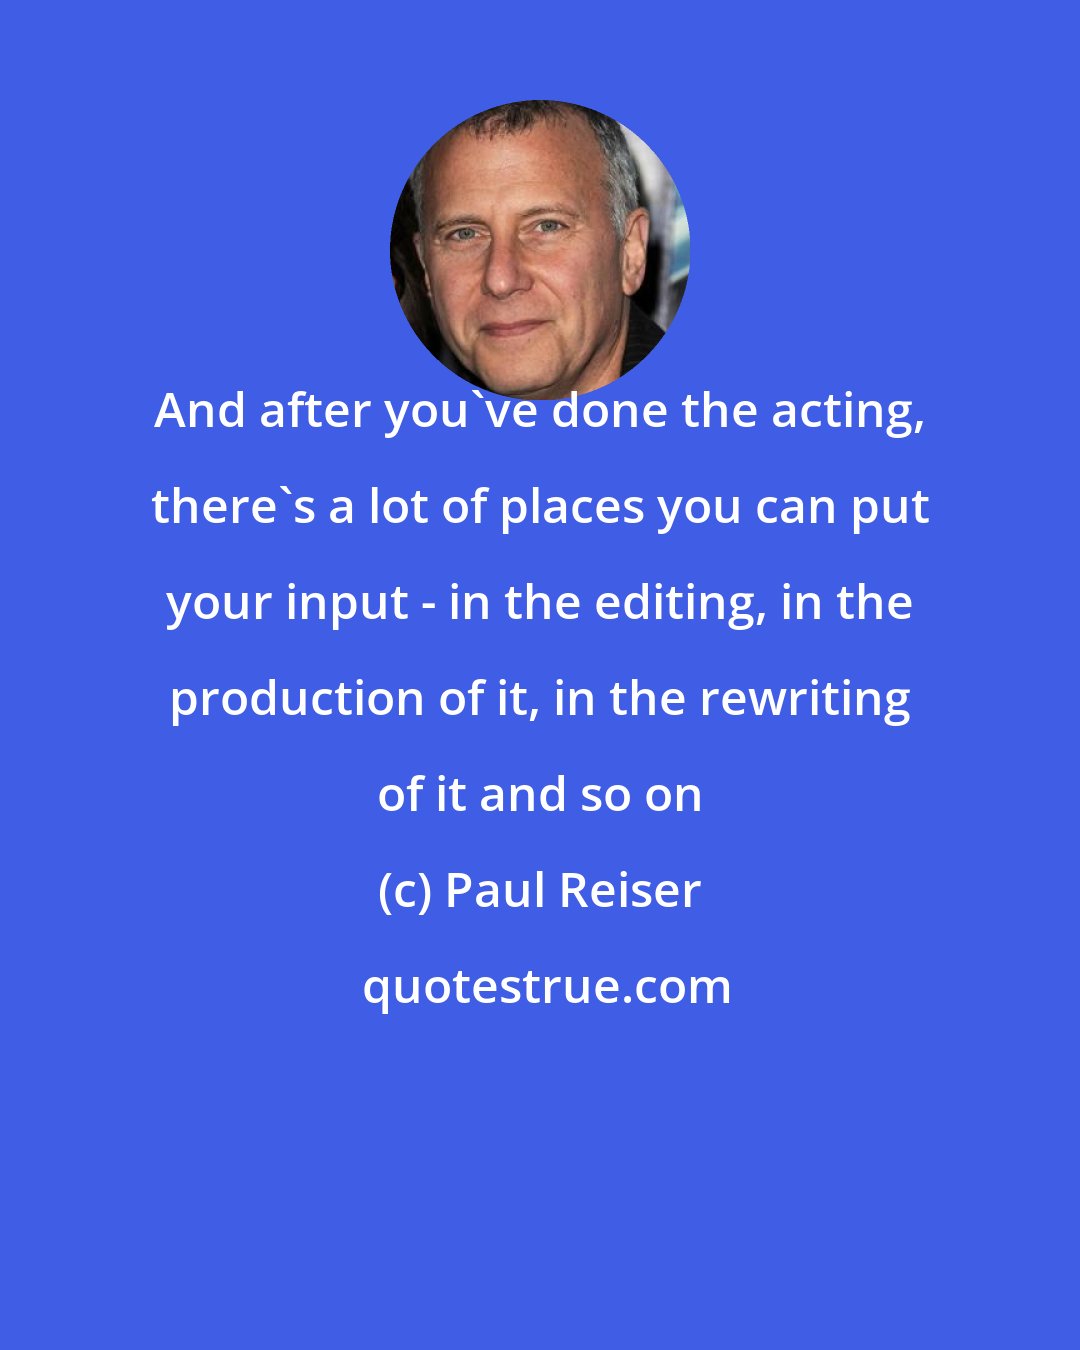 Paul Reiser: And after you've done the acting, there's a lot of places you can put your input - in the editing, in the production of it, in the rewriting of it and so on